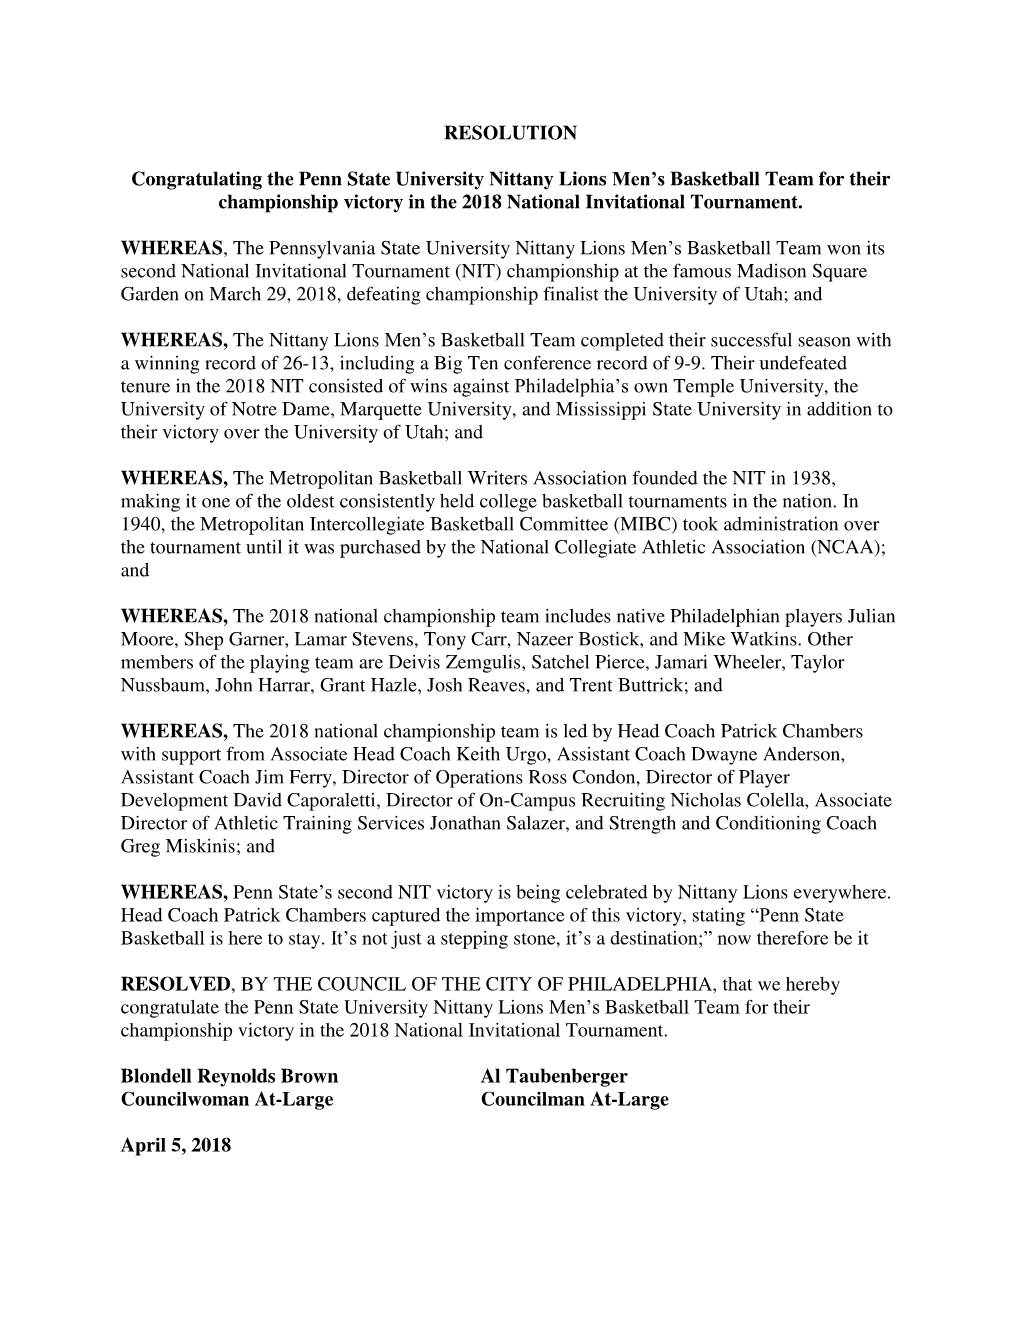 RESOLUTION Congratulating the Penn State University Nittany Lions